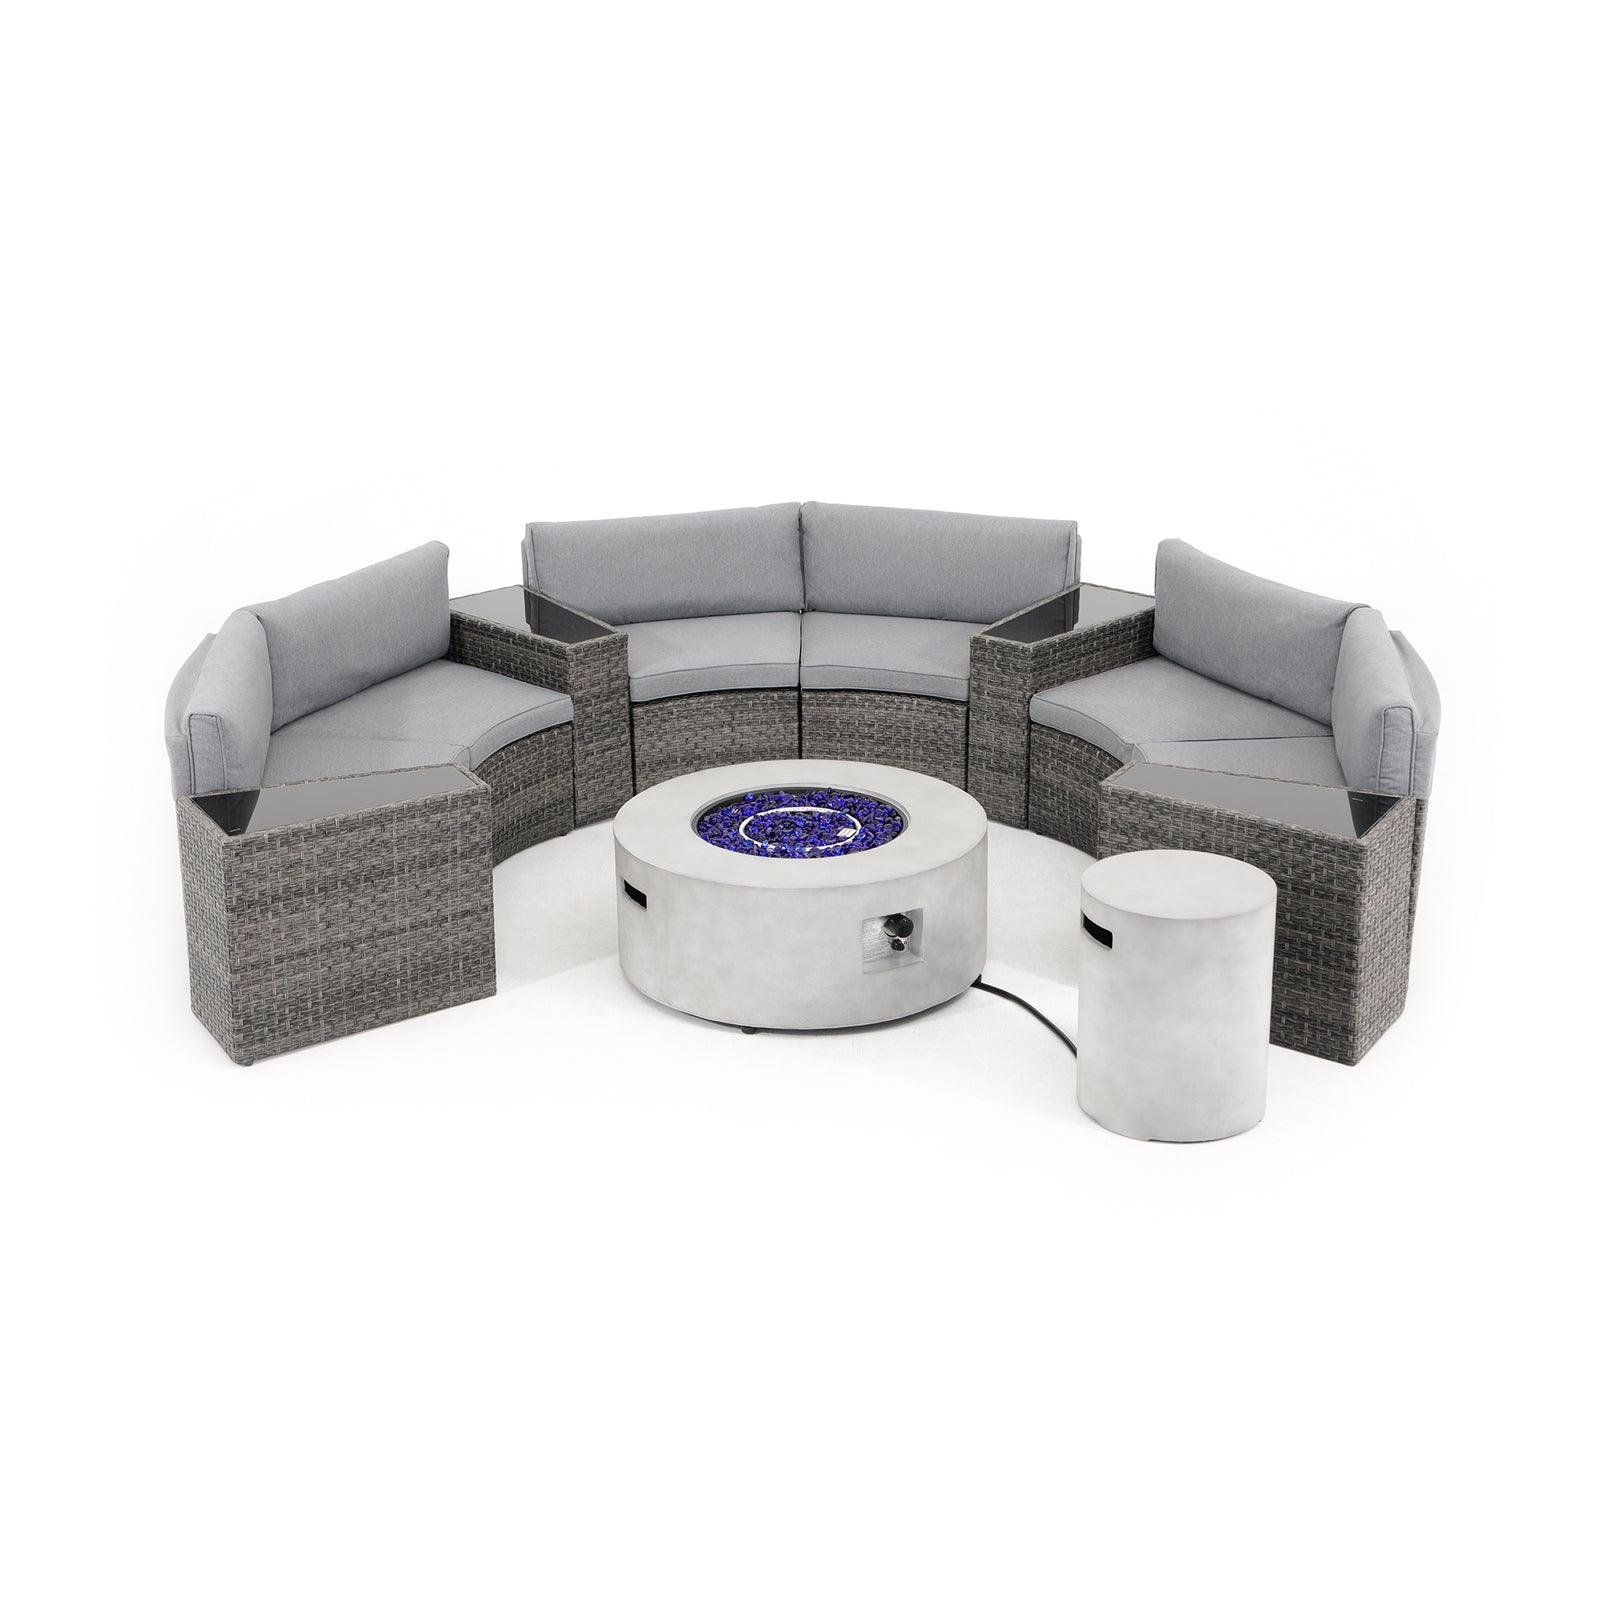 Boboli Modern Wicker Outdoor Furniture, 6-seater Grey Wicker Curved Sectional sofas with grey cushions, 4 side tables + 1 grey Propane Fire Pit with tank holder, front view- Jardina Furniture #color_Grey #piece_11-pc.